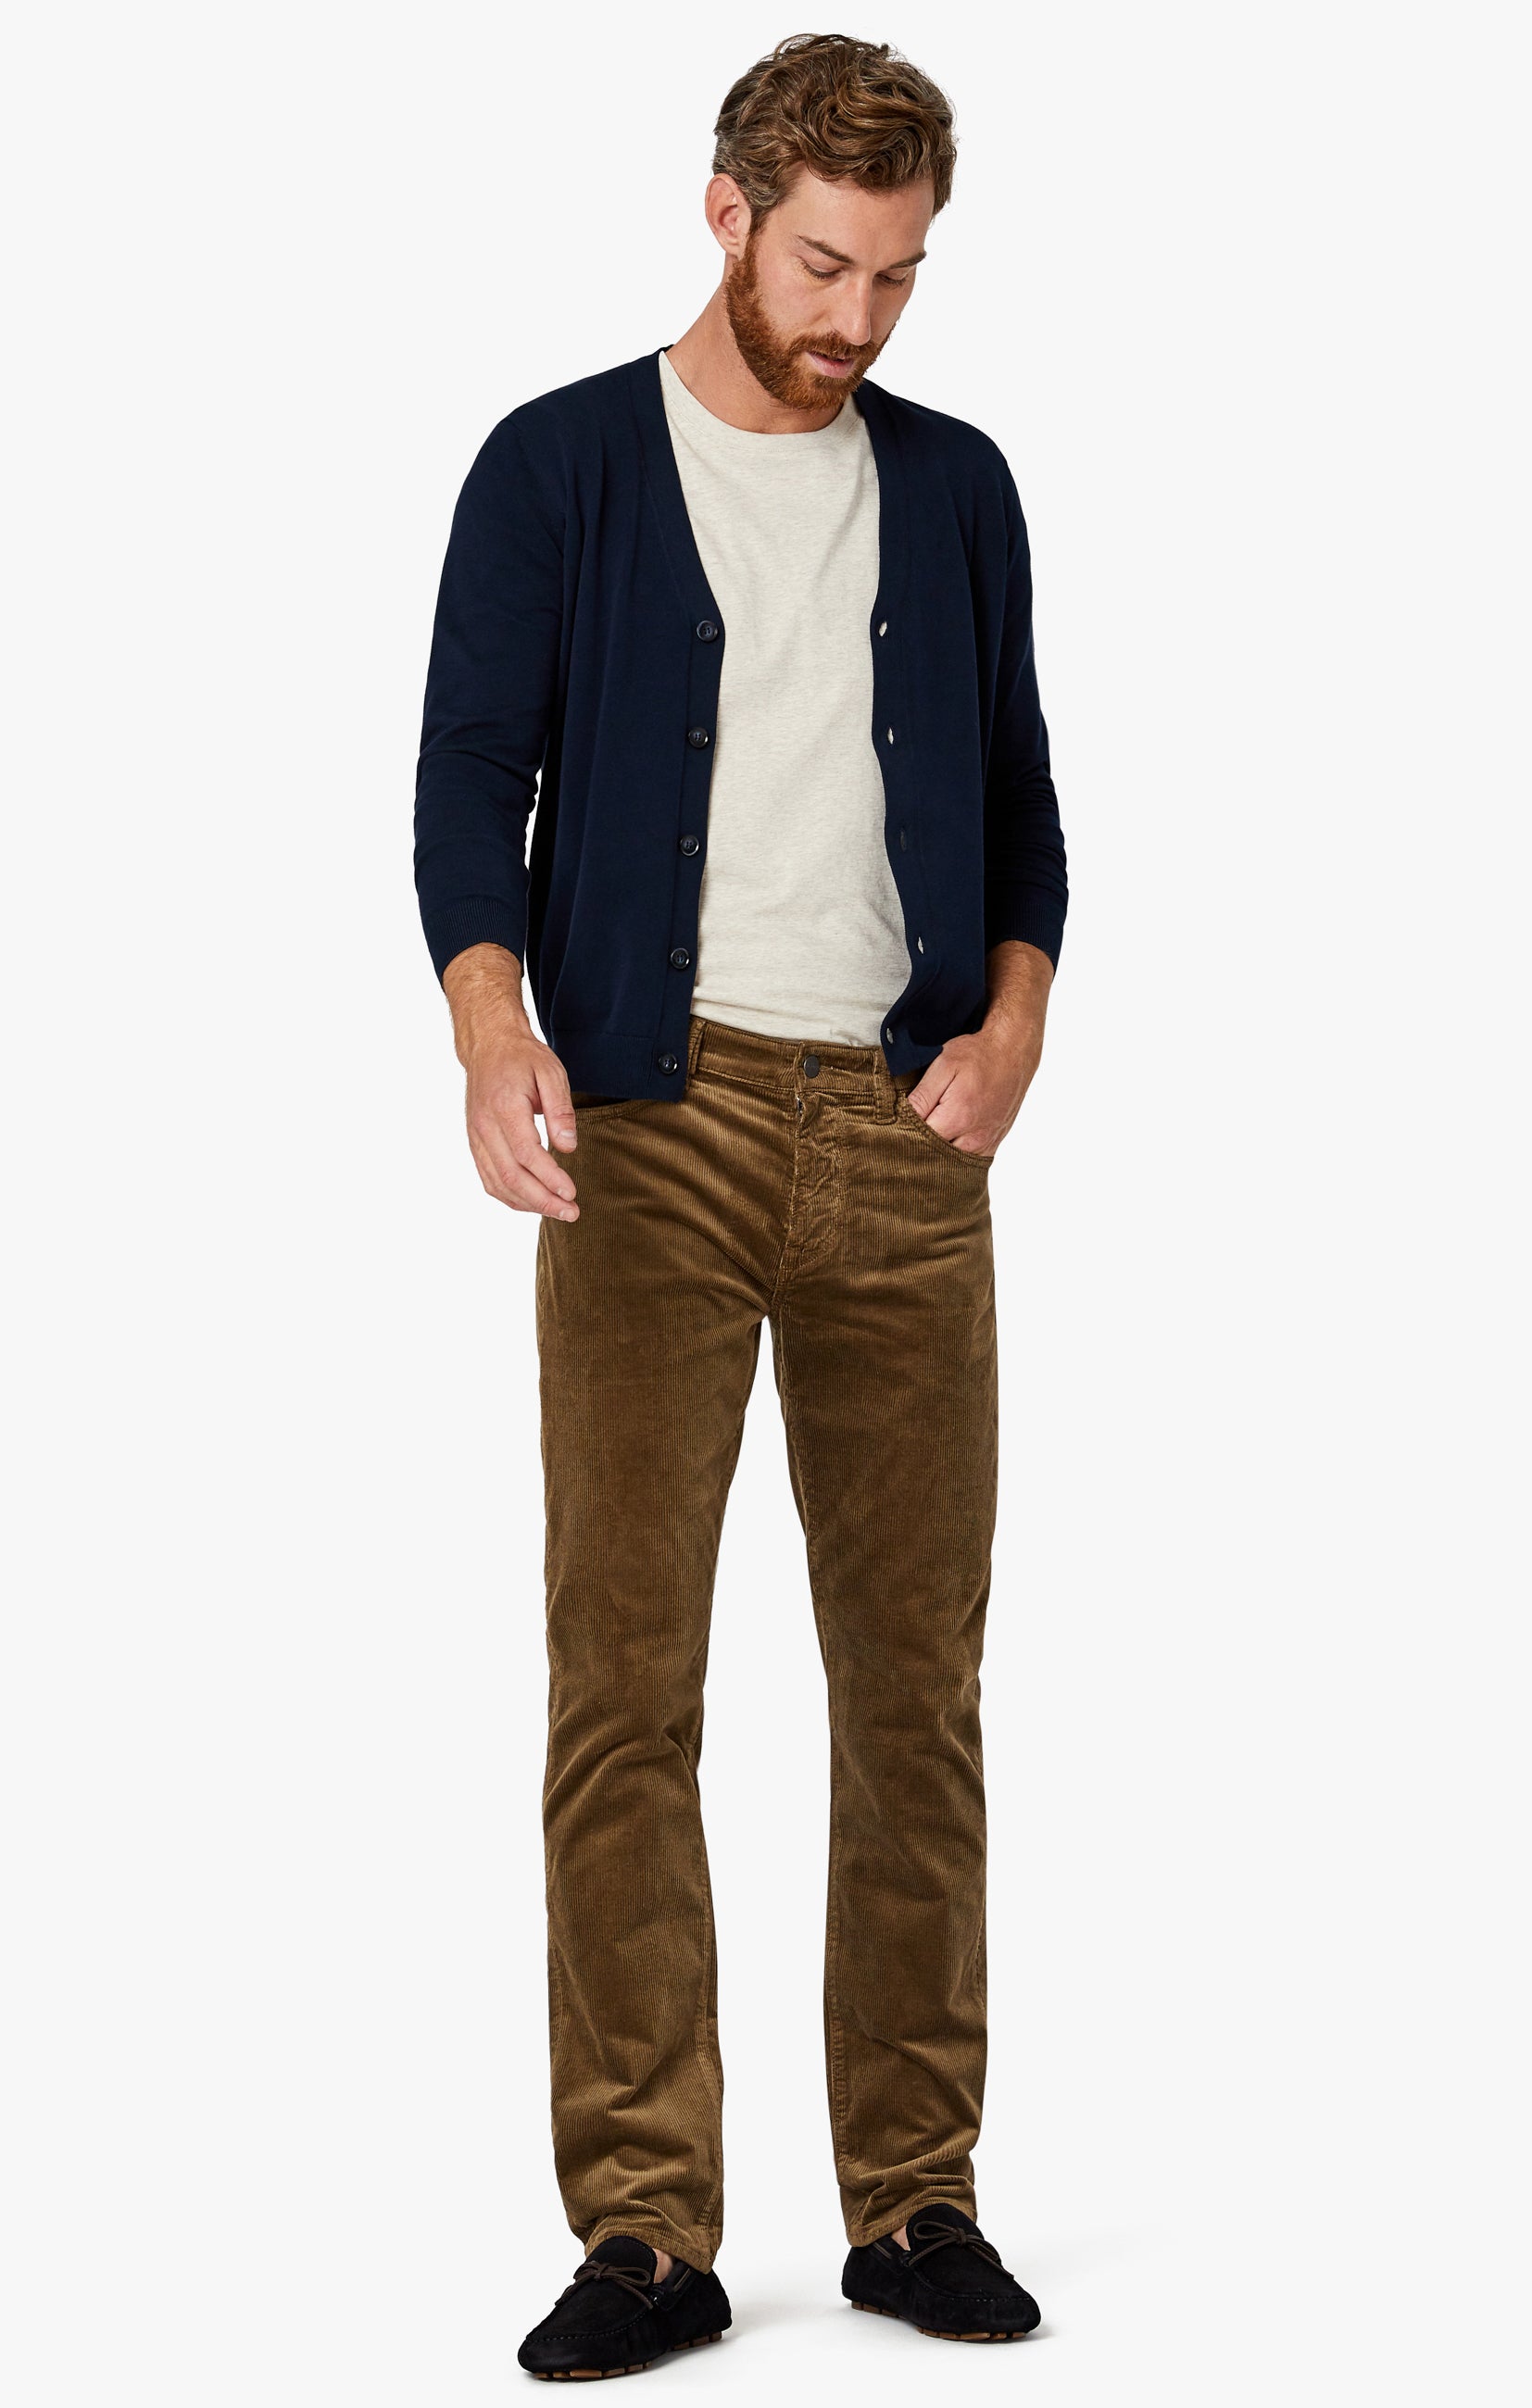 Courage Straight Leg Pants In Tobacco Cord Image 1